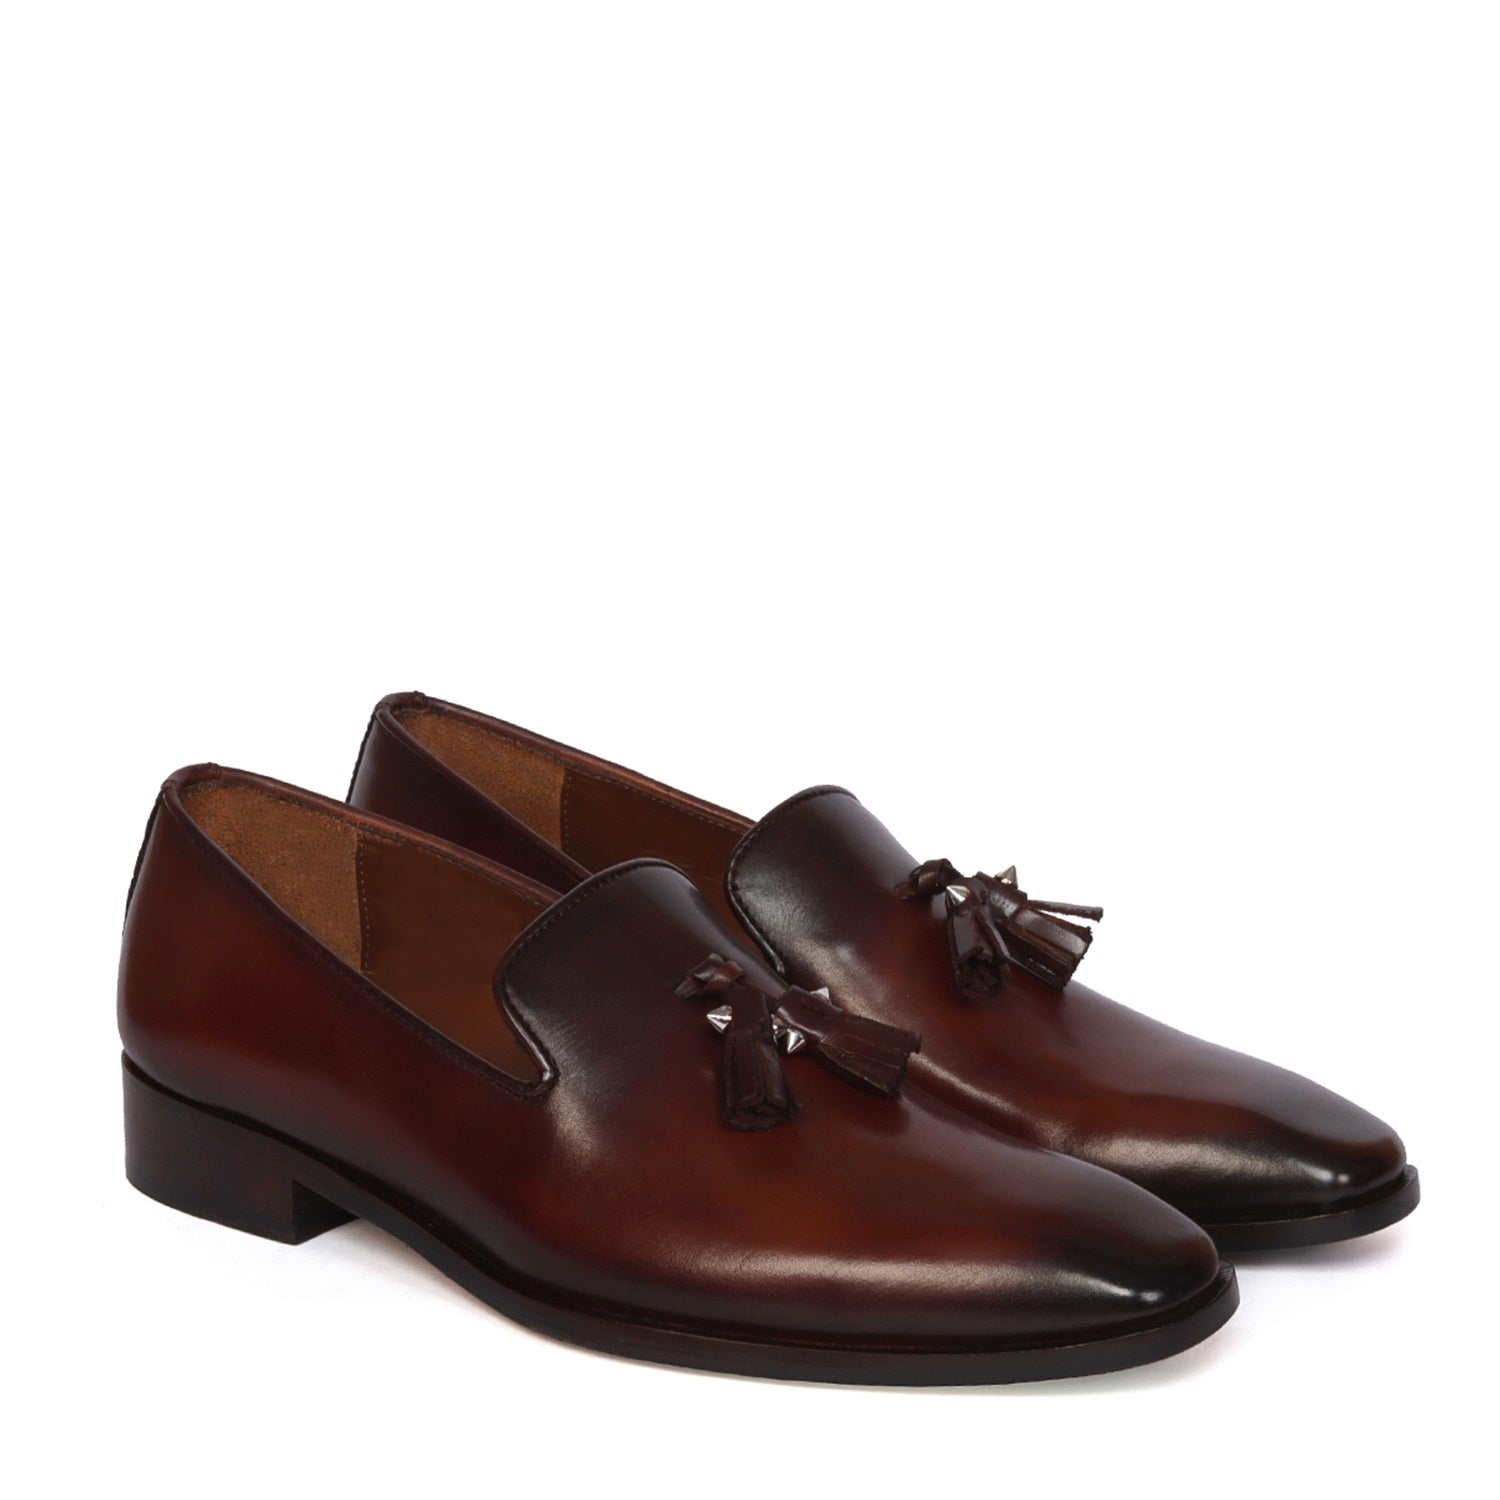 Tassel Italian Loafers for Men's with Dark Brown Leather